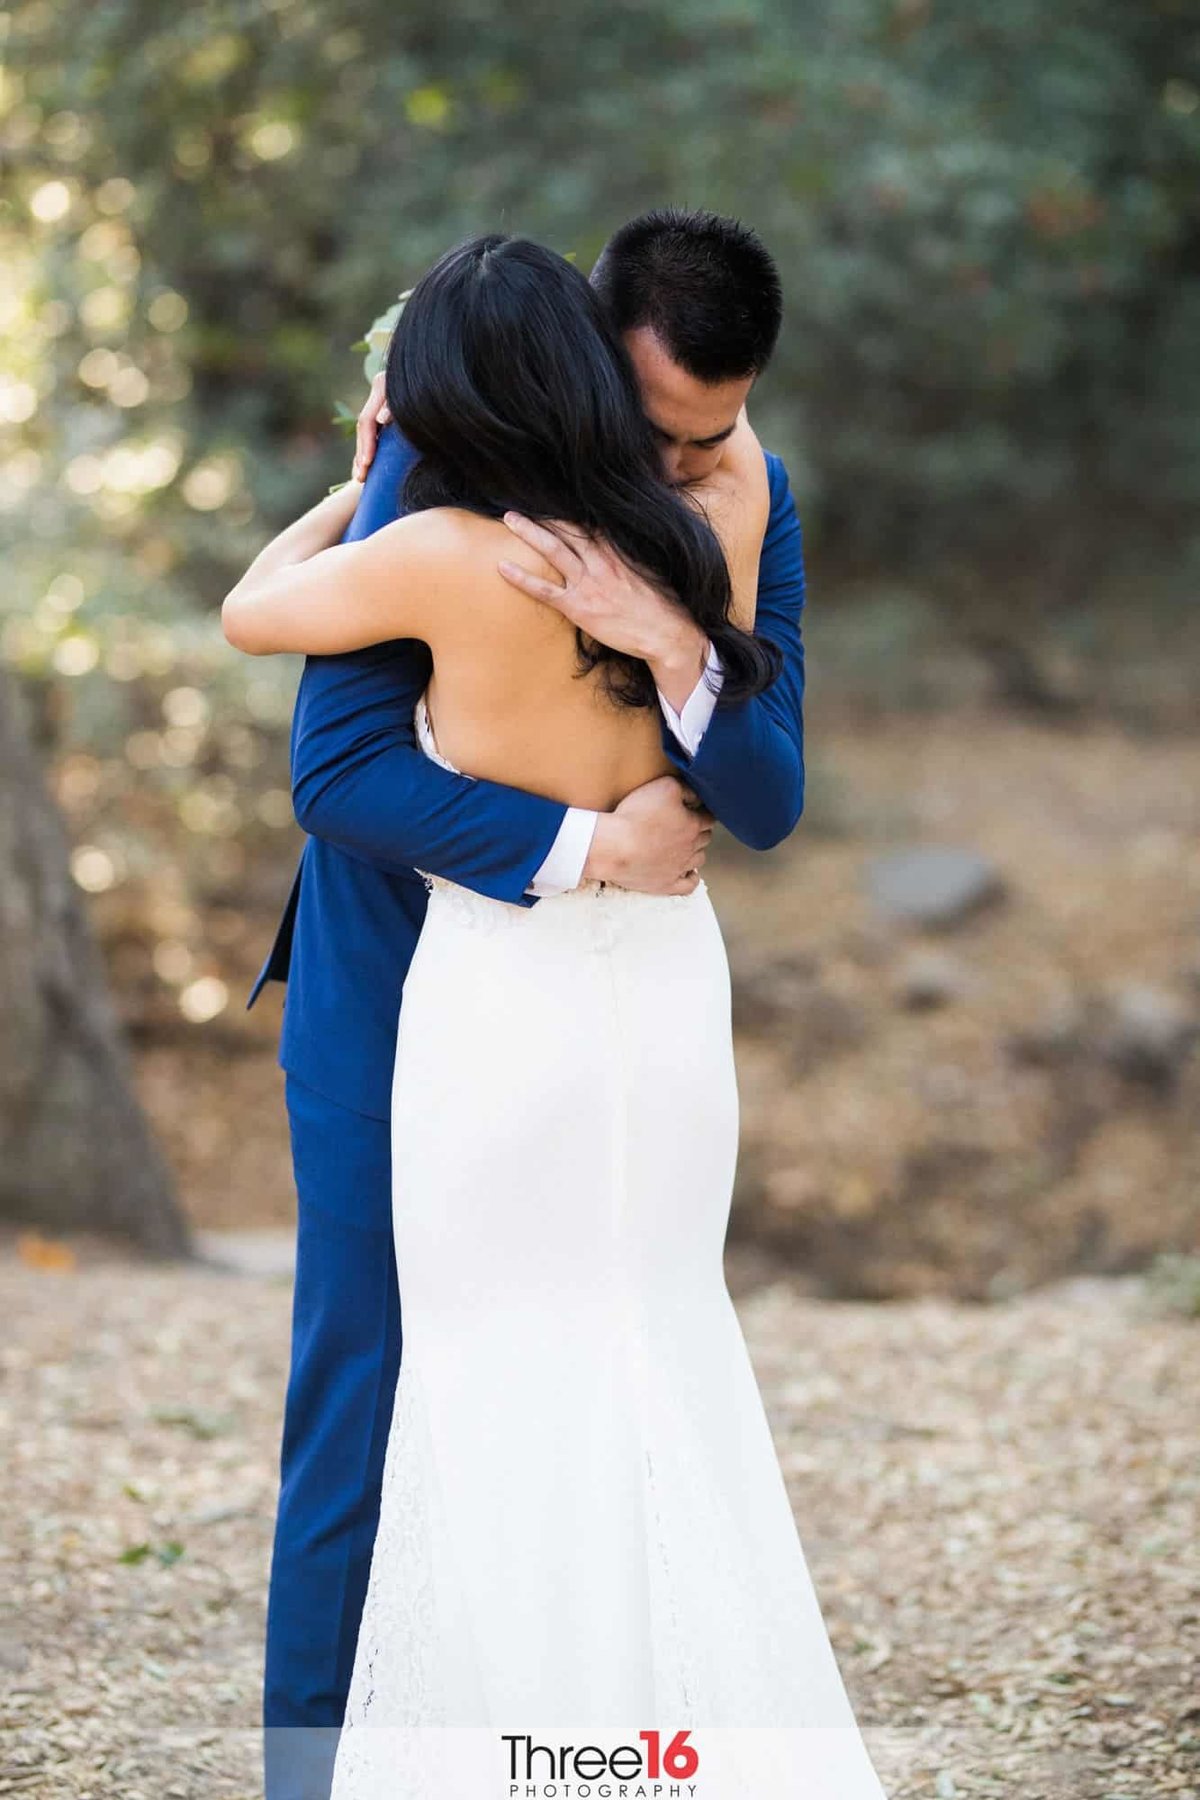 Tender moment between Bride and Groom as they embrace each other